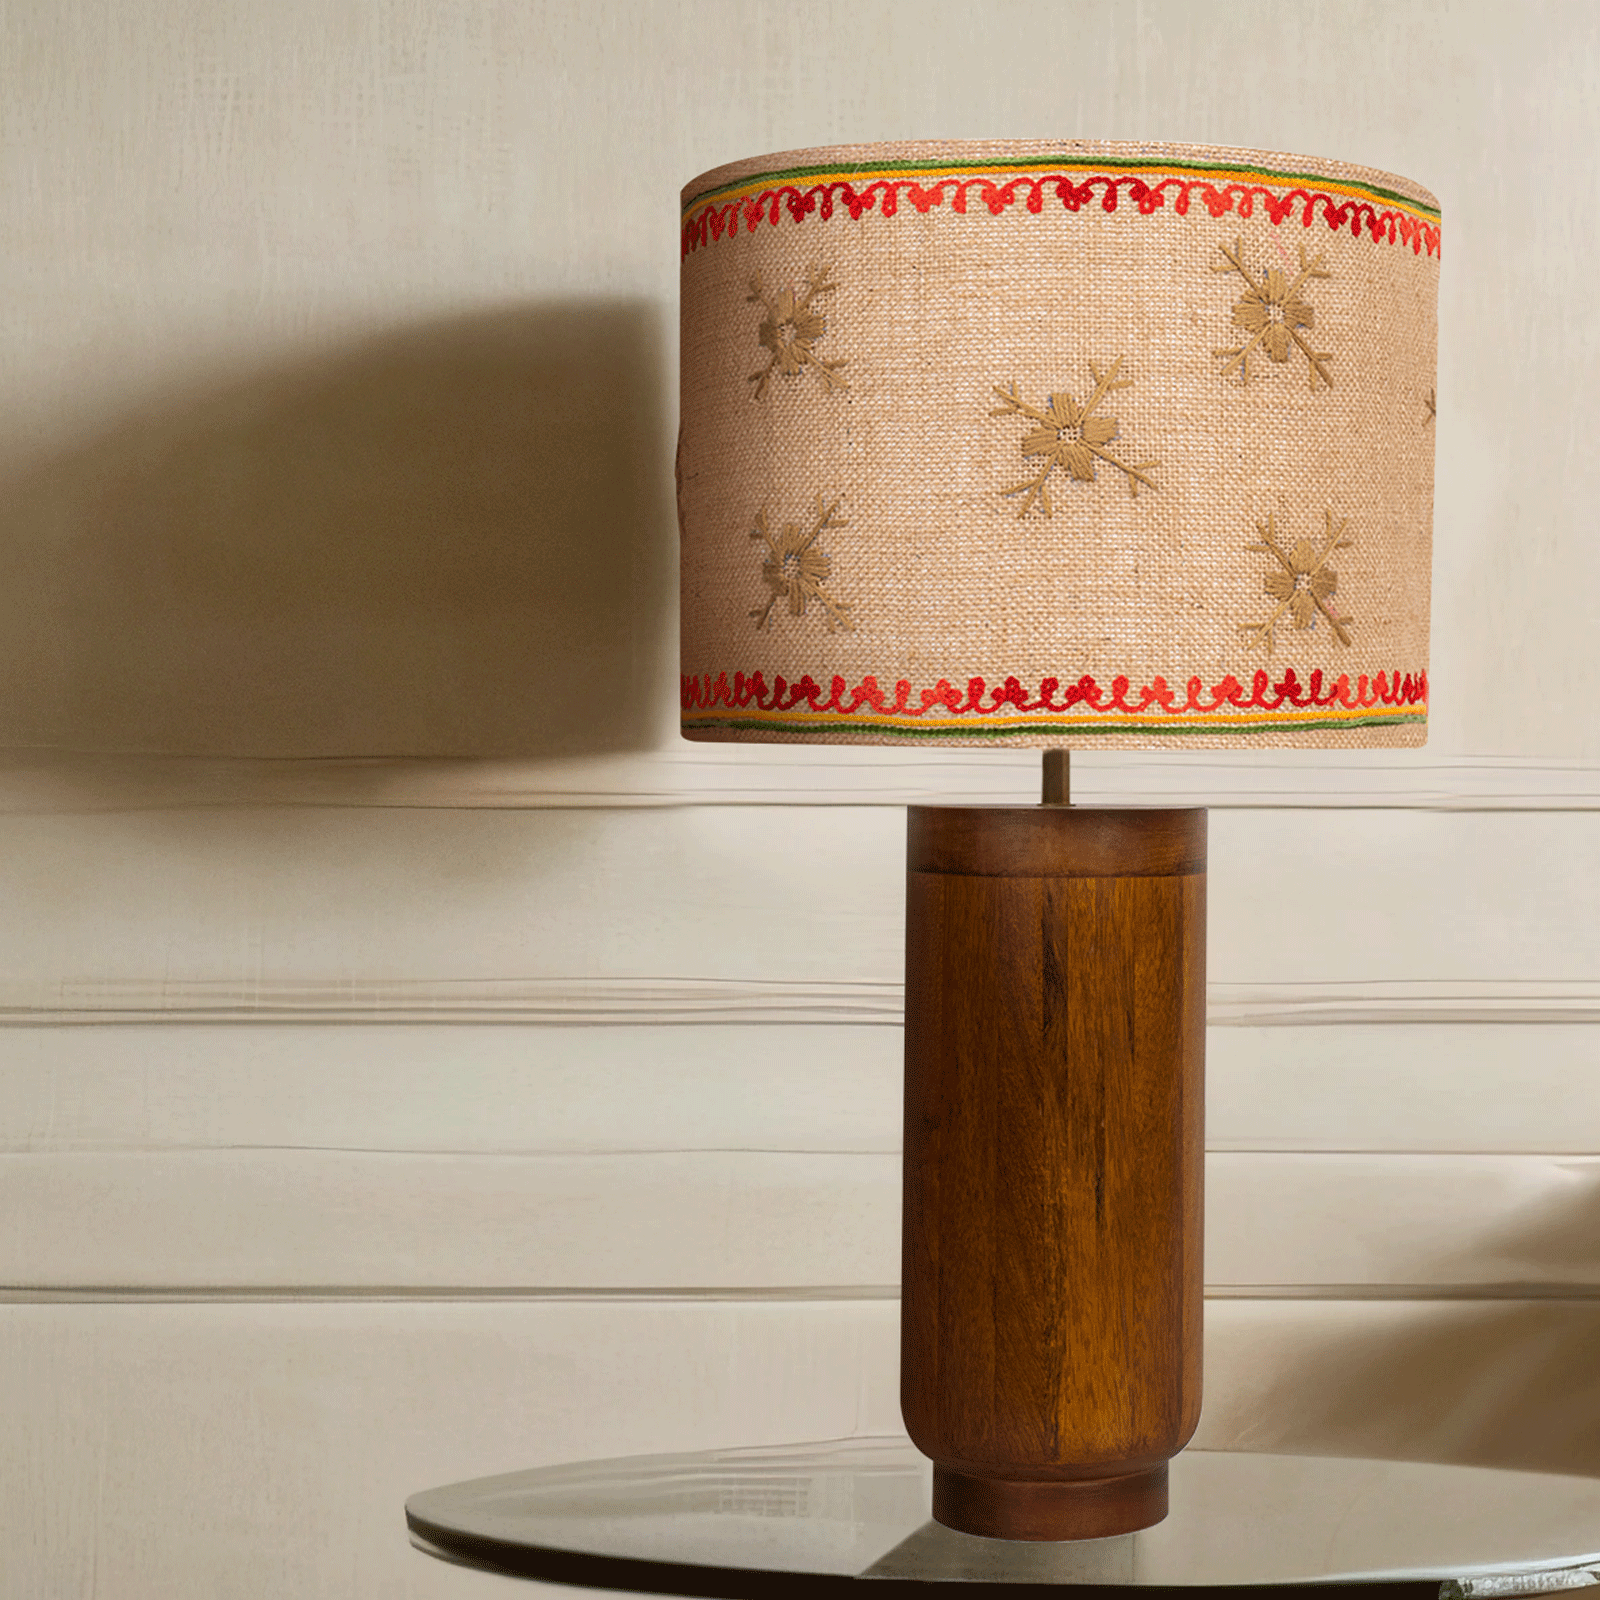 Gesu Table Lamp with jute embroidery shade